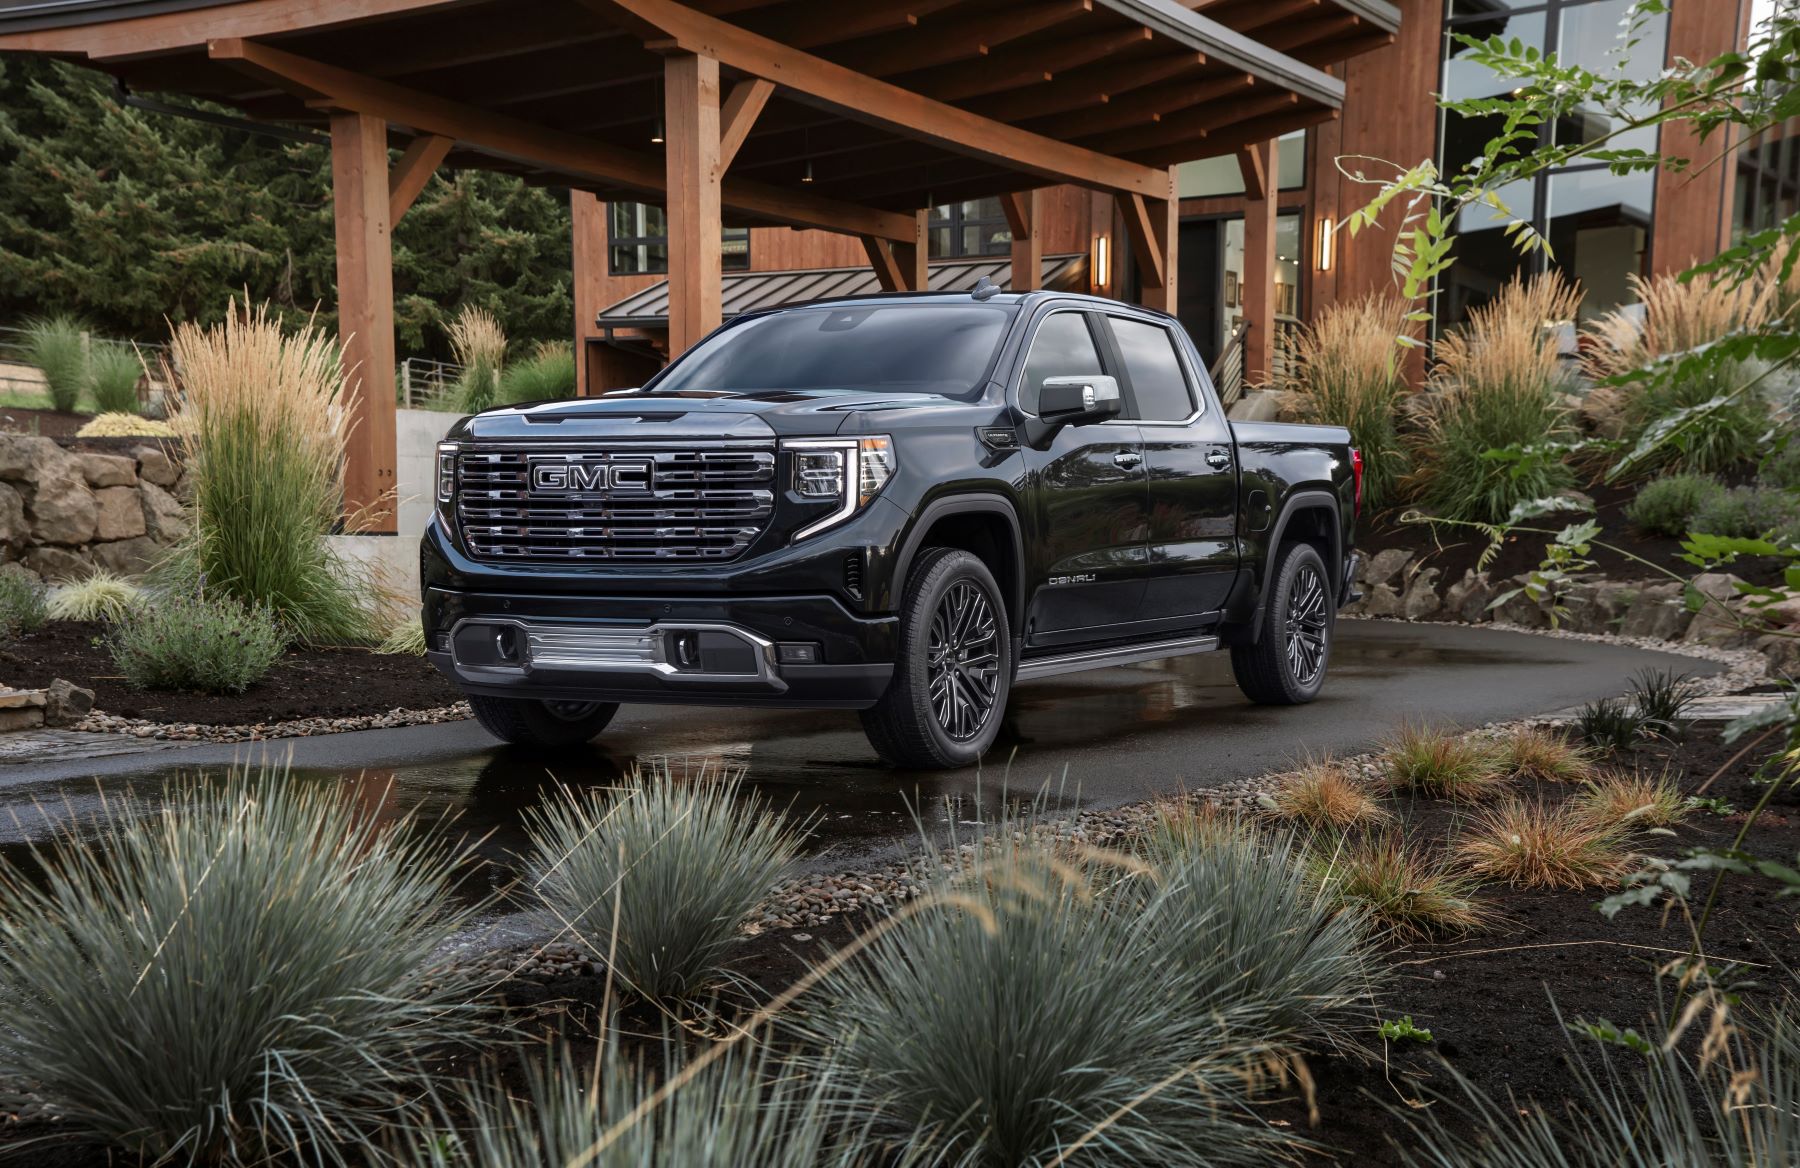 2022 GMC Sierra 1500 Denali Ultimate premium pickup in full size parked in the driveway of a luxury forest house